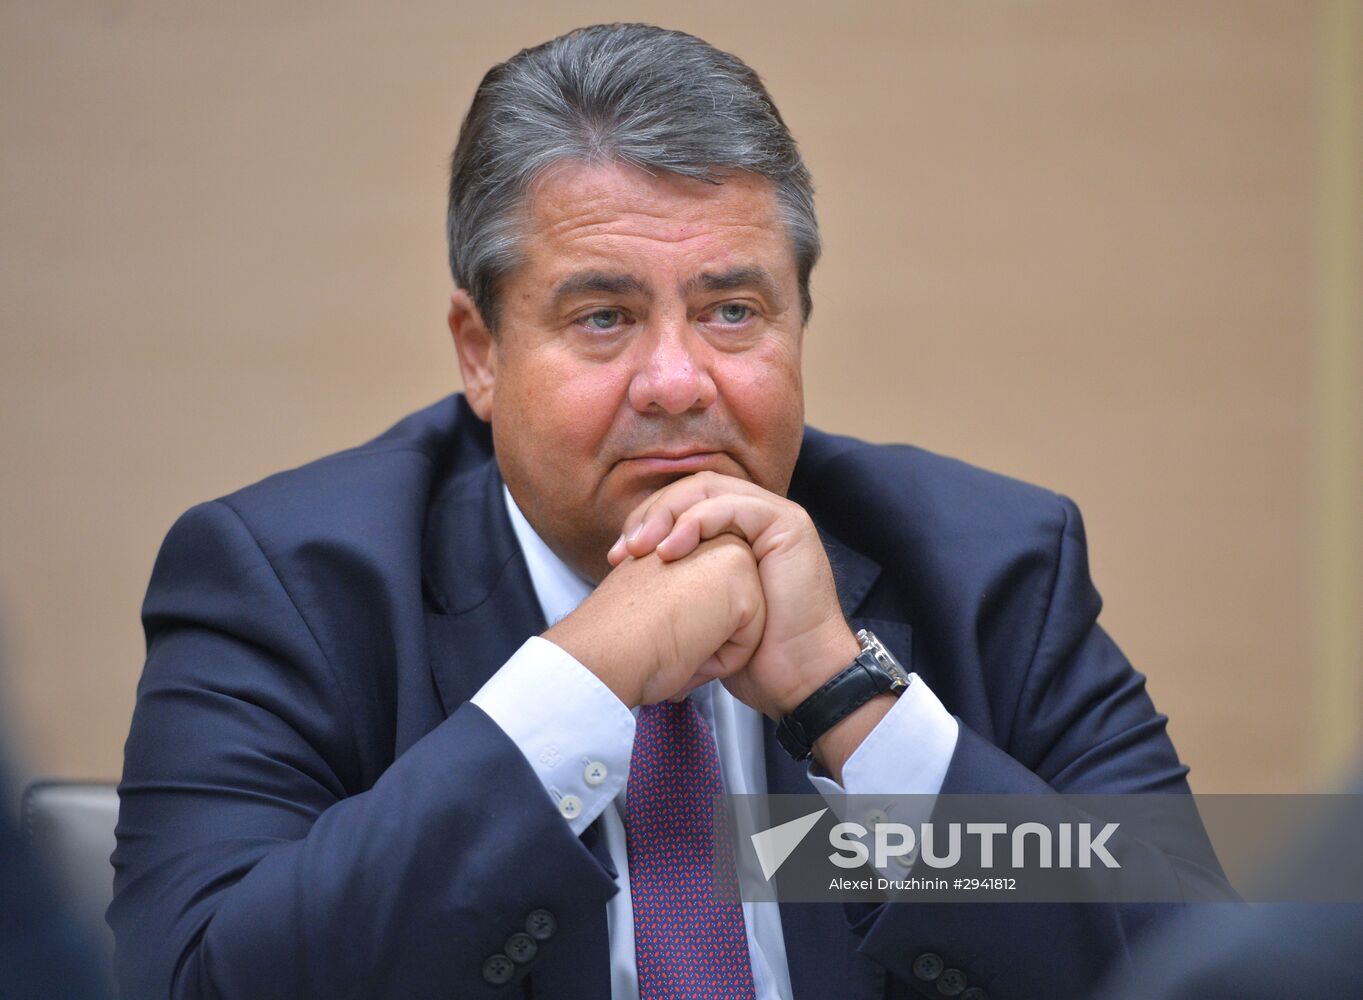 Vladimir Putin meets with German Vice Chancellor and Minister for Economic Affairs and Energy Sigmar Gabriel